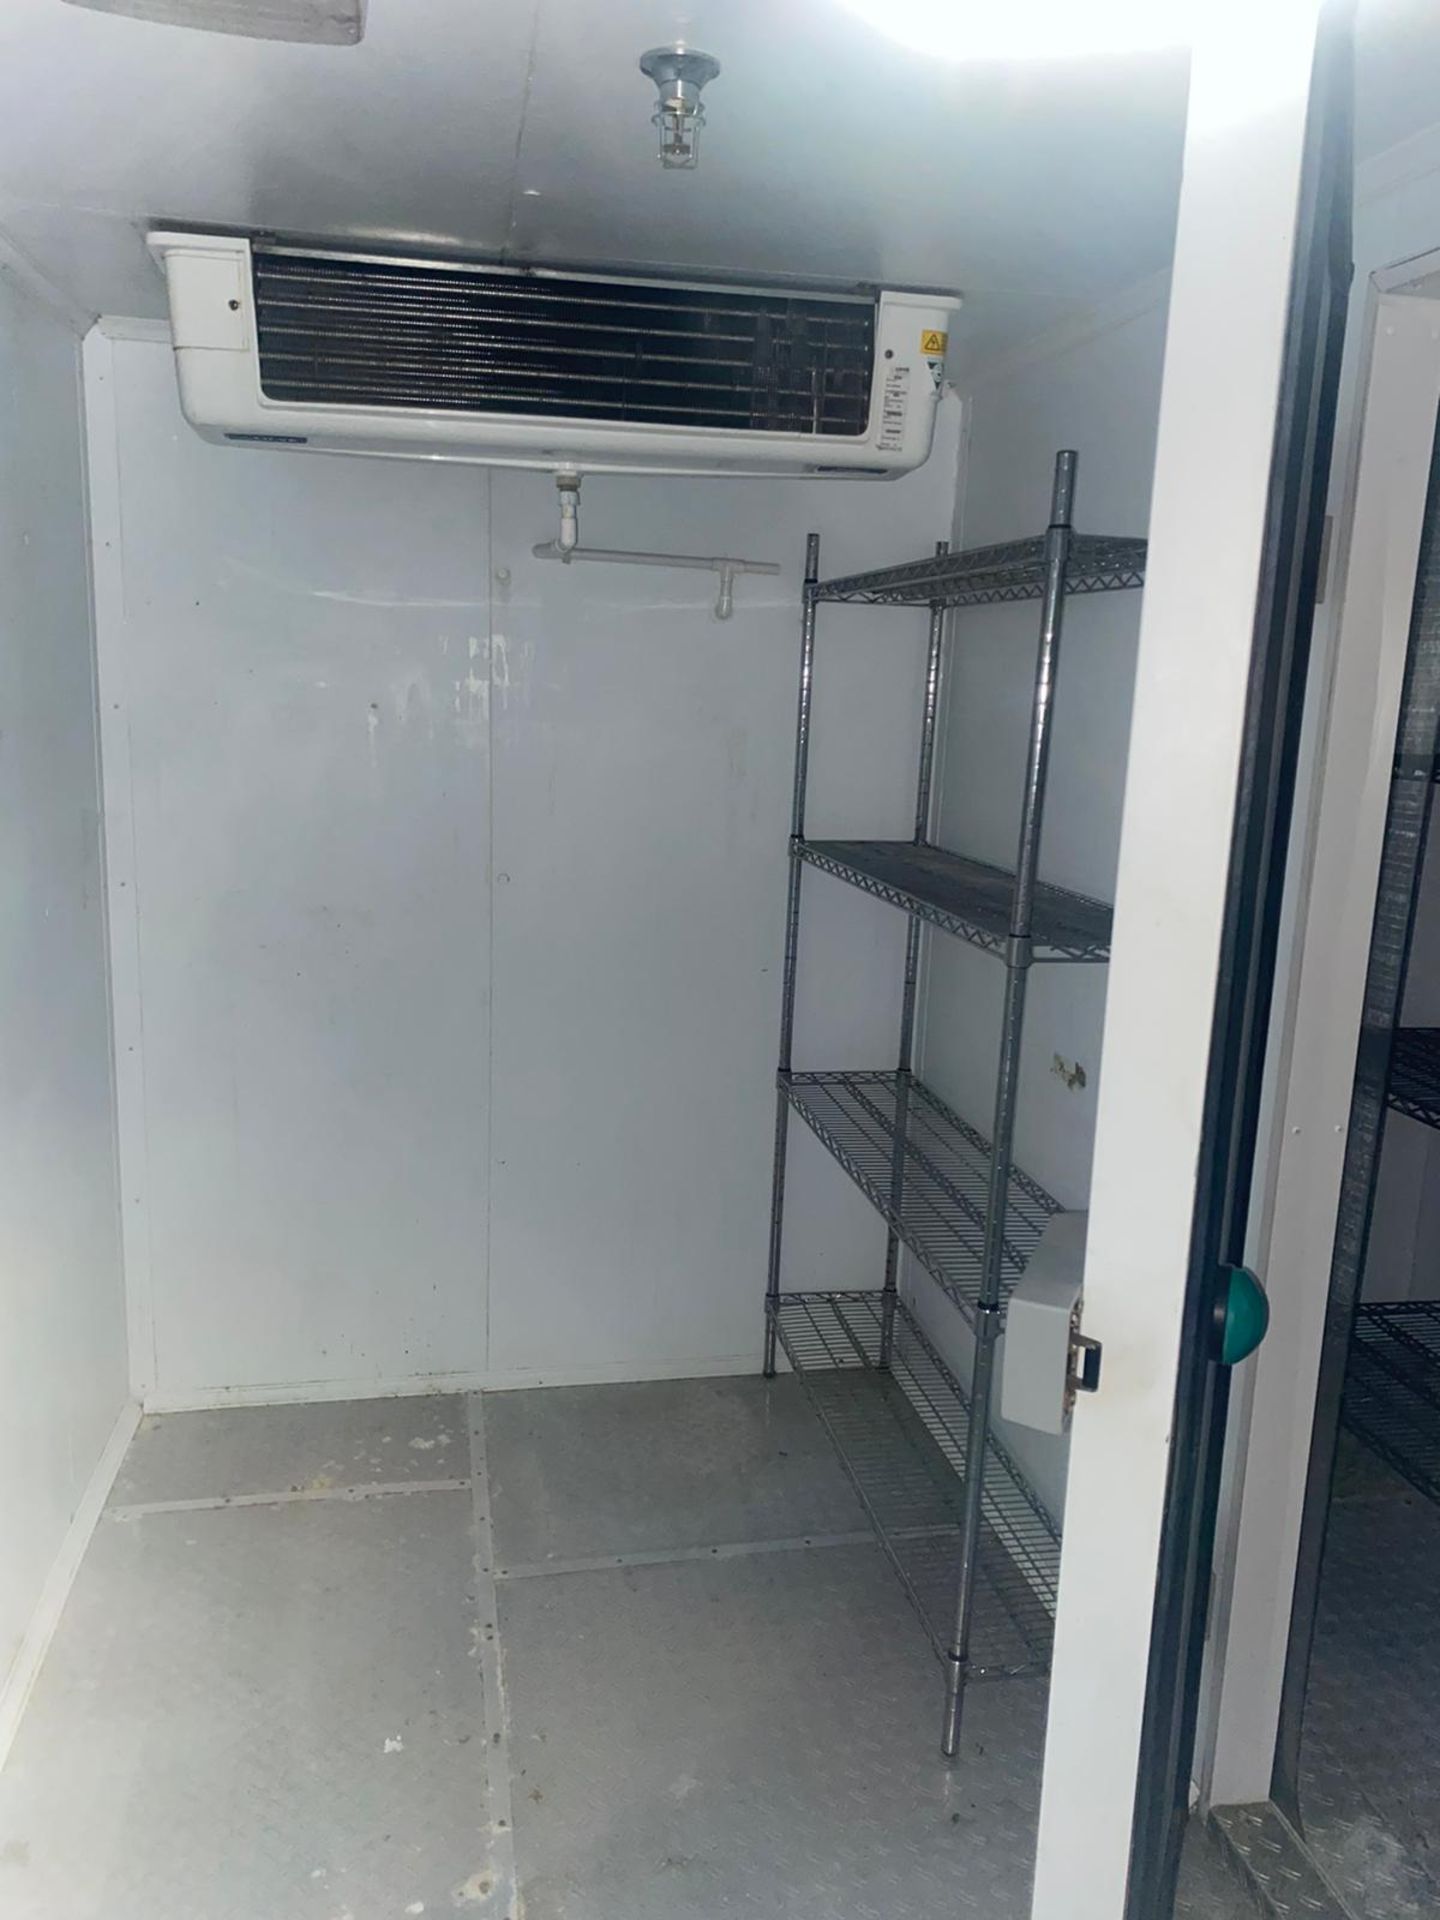 1 x Walk In Chiller & Freezer - Two Rooms With Sliding Doors, Cooling Equipment and Internal Shelves - Image 6 of 12